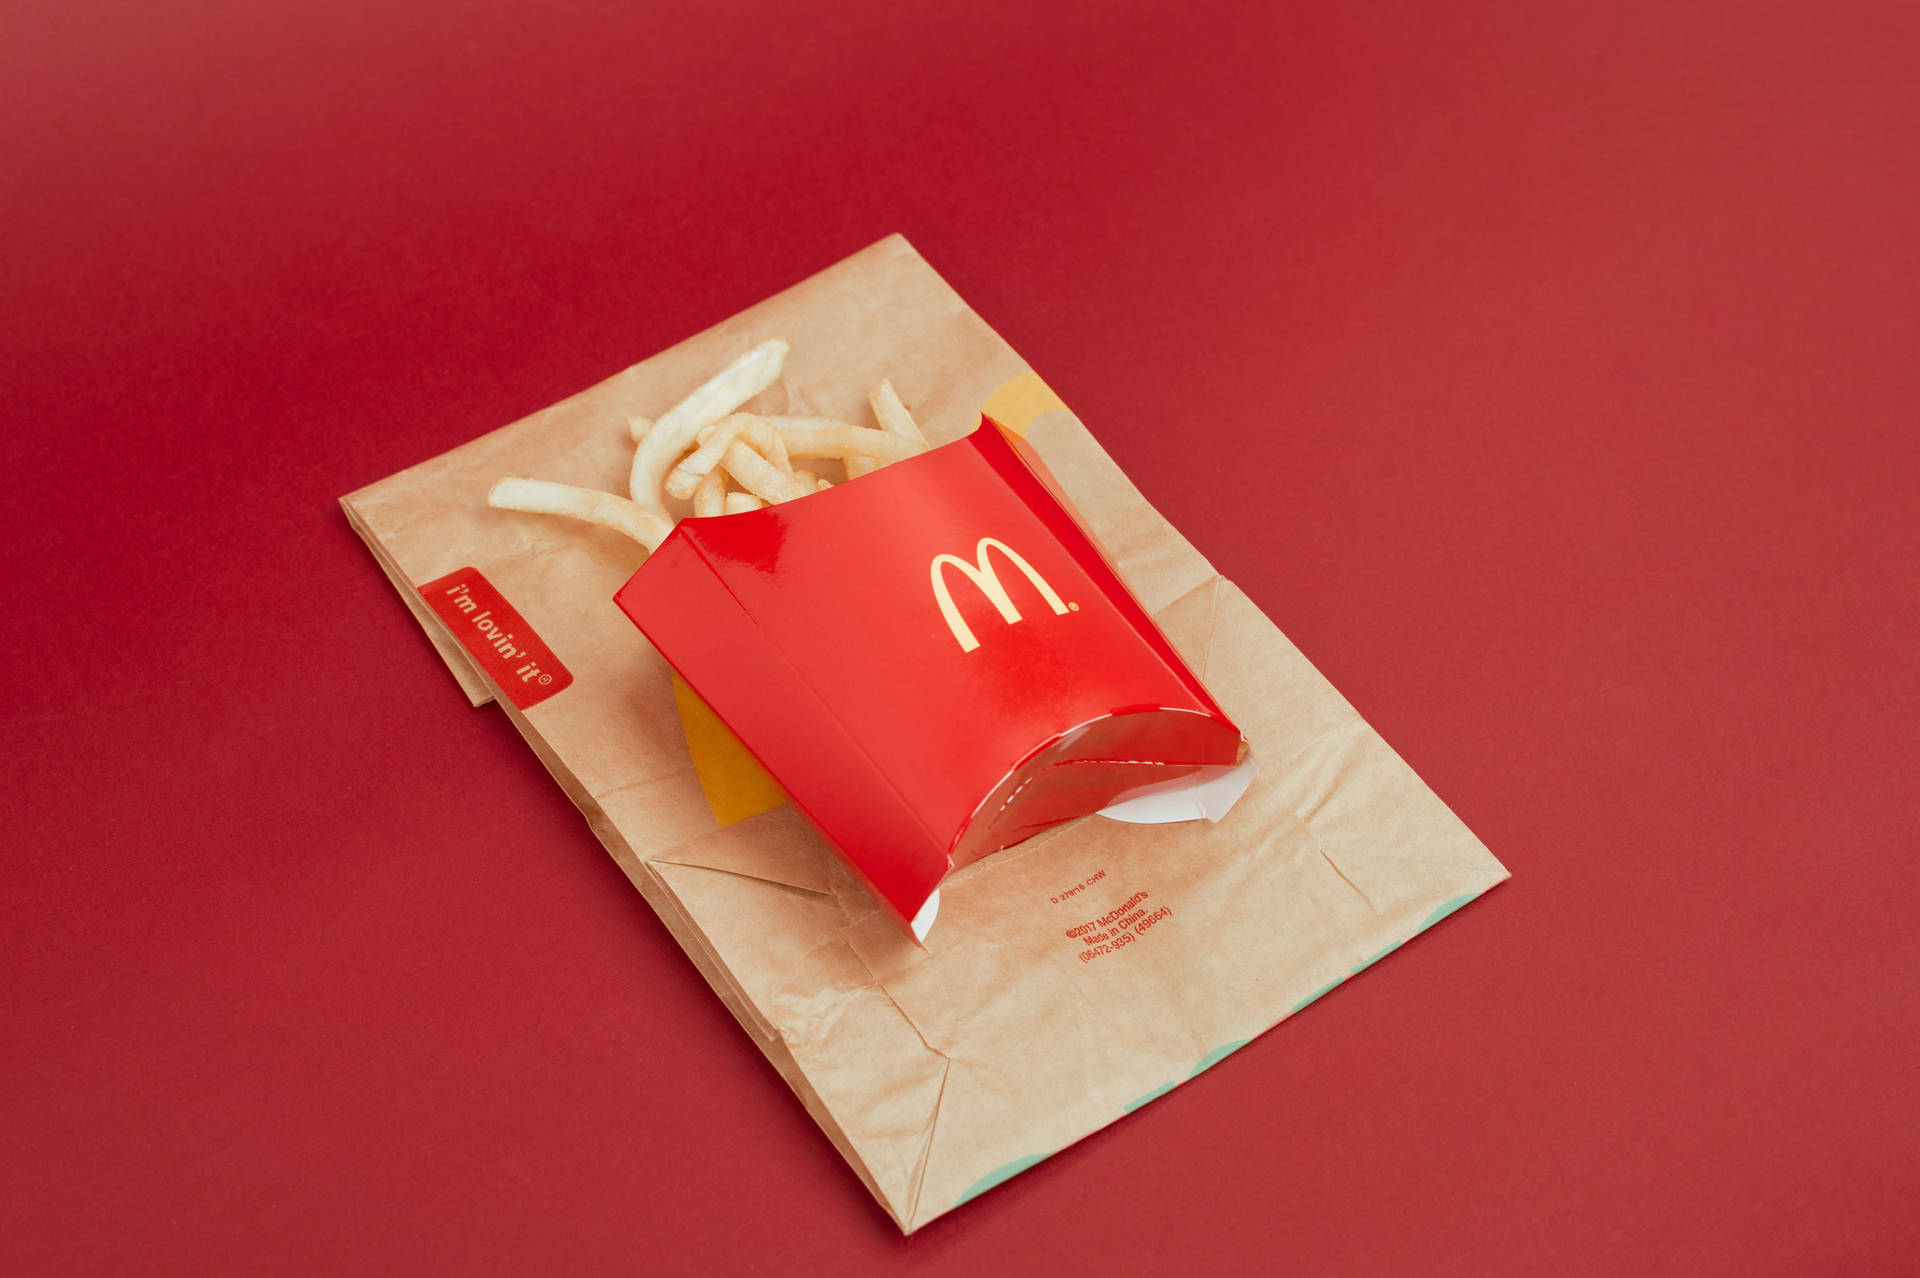 Mcdonalds 4928X3280 Wallpaper and Background Image